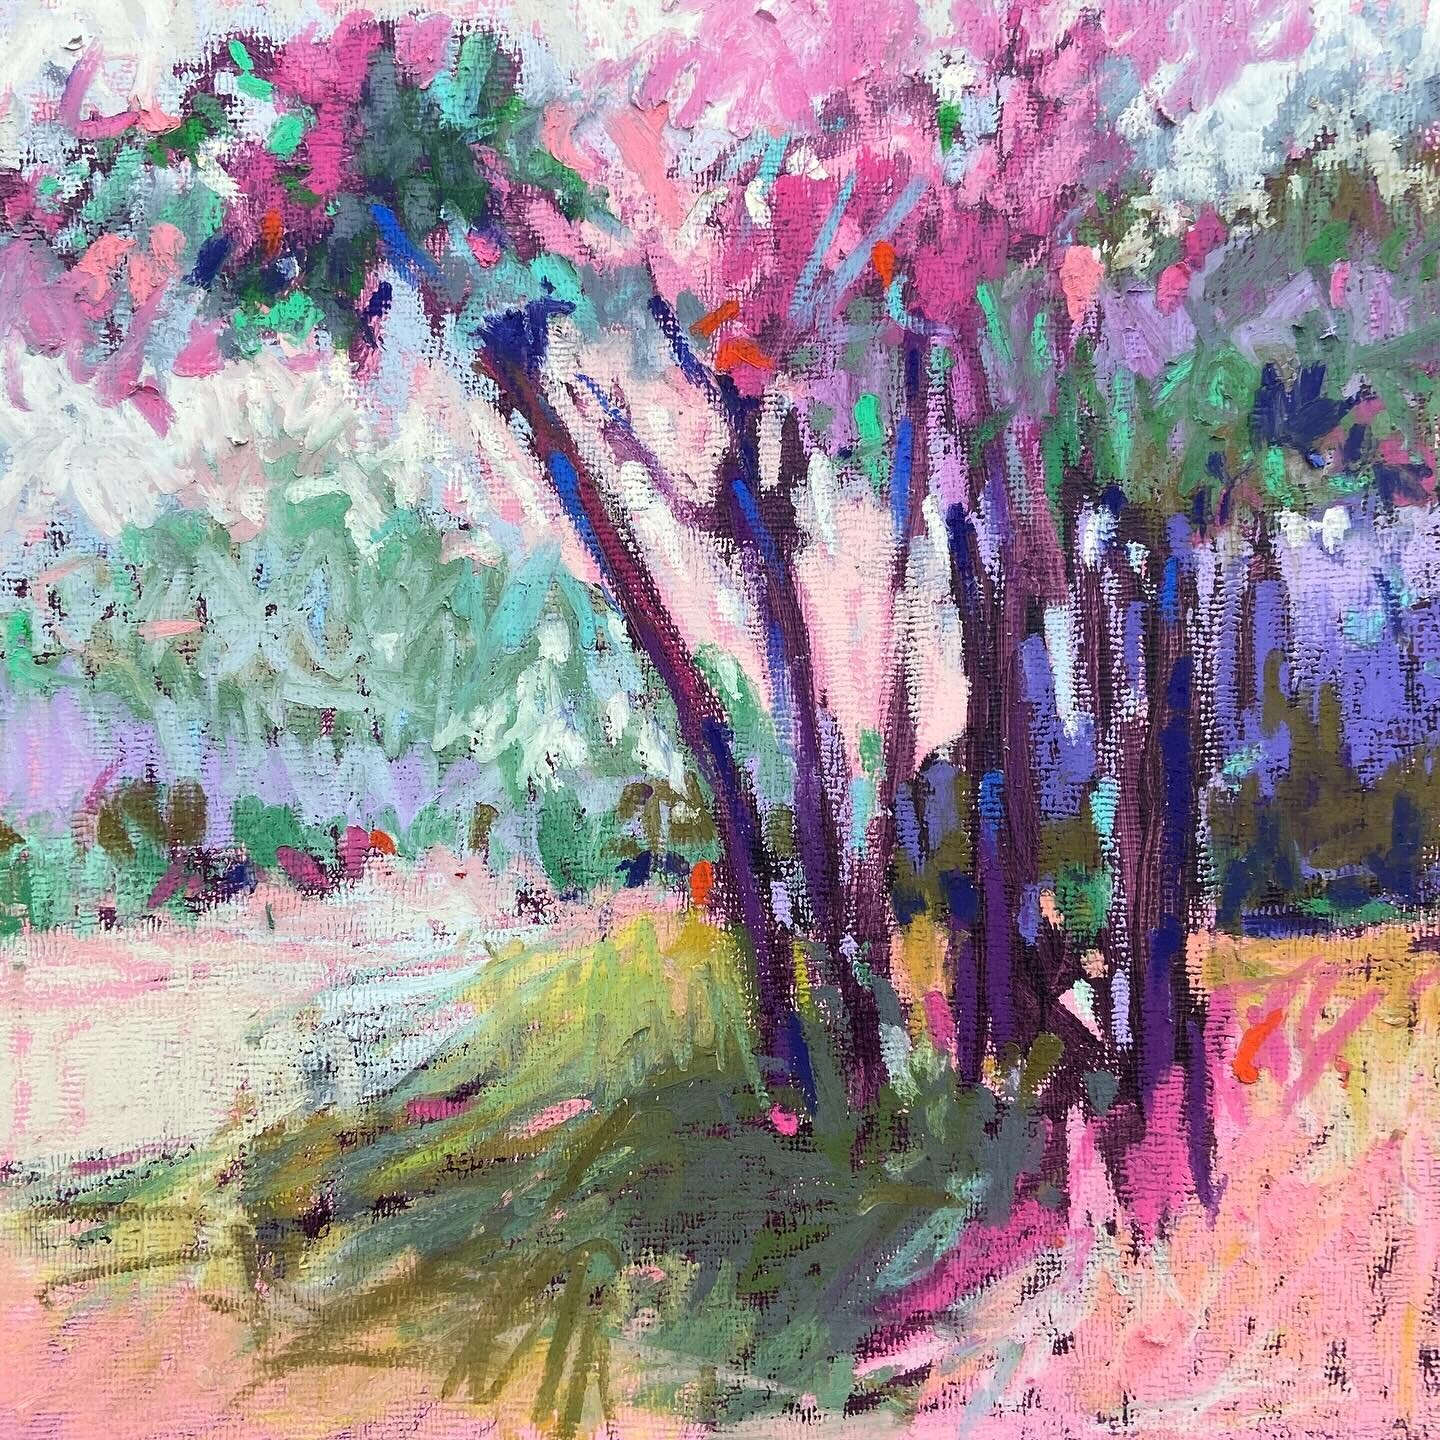 Don&rsquo;t know why? Clearly in a pink mood today. Could be the beautiful pink trees blooming all over Orlando lately. #dailypainting #oilpastel #color #landscapepainting #joycesheltonstudio